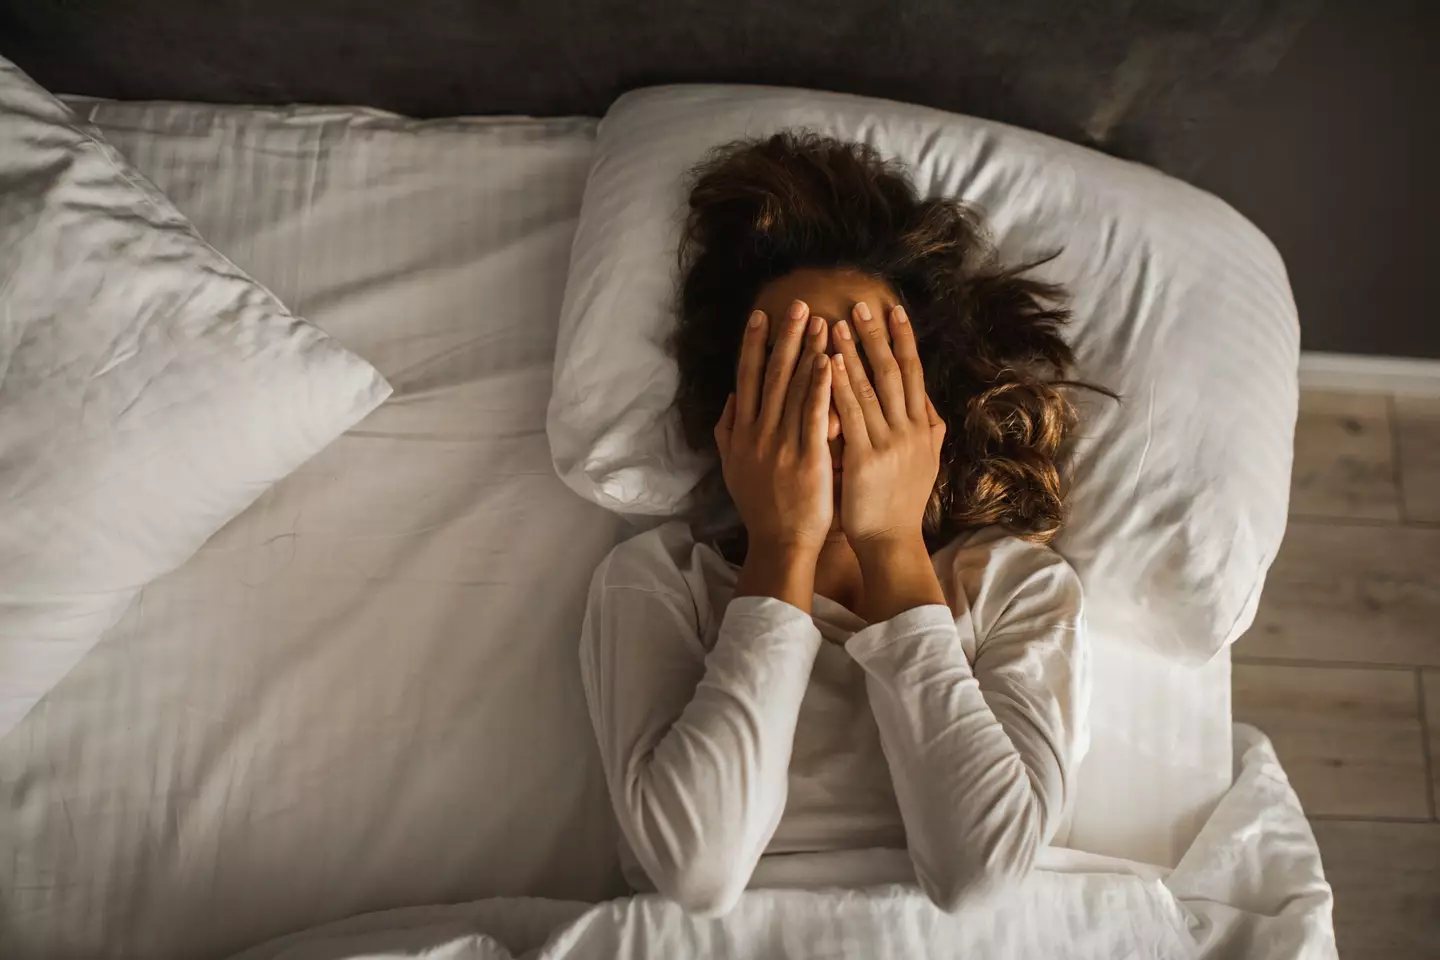 If you can't get back to sleep within 15 mins then it's time to get up, the expert advises.